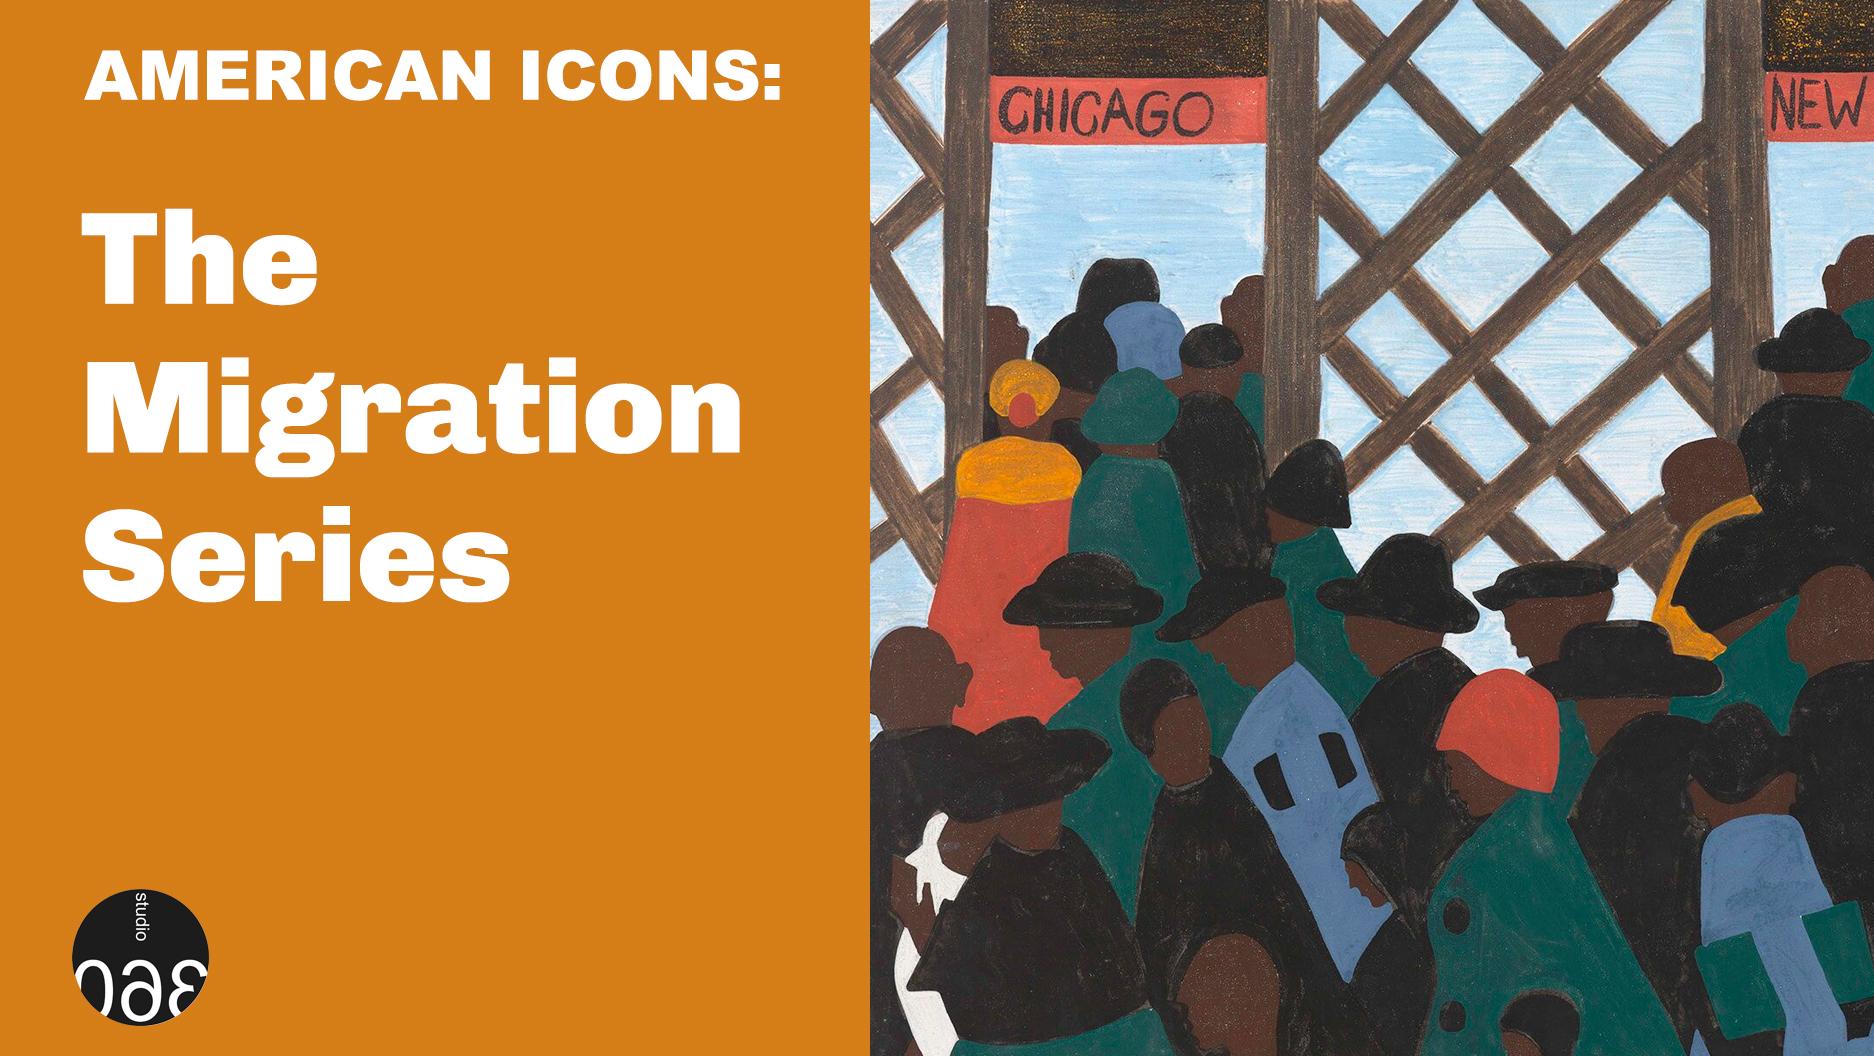 American Icons: 'The Migration Series' by Jacob Lawrence